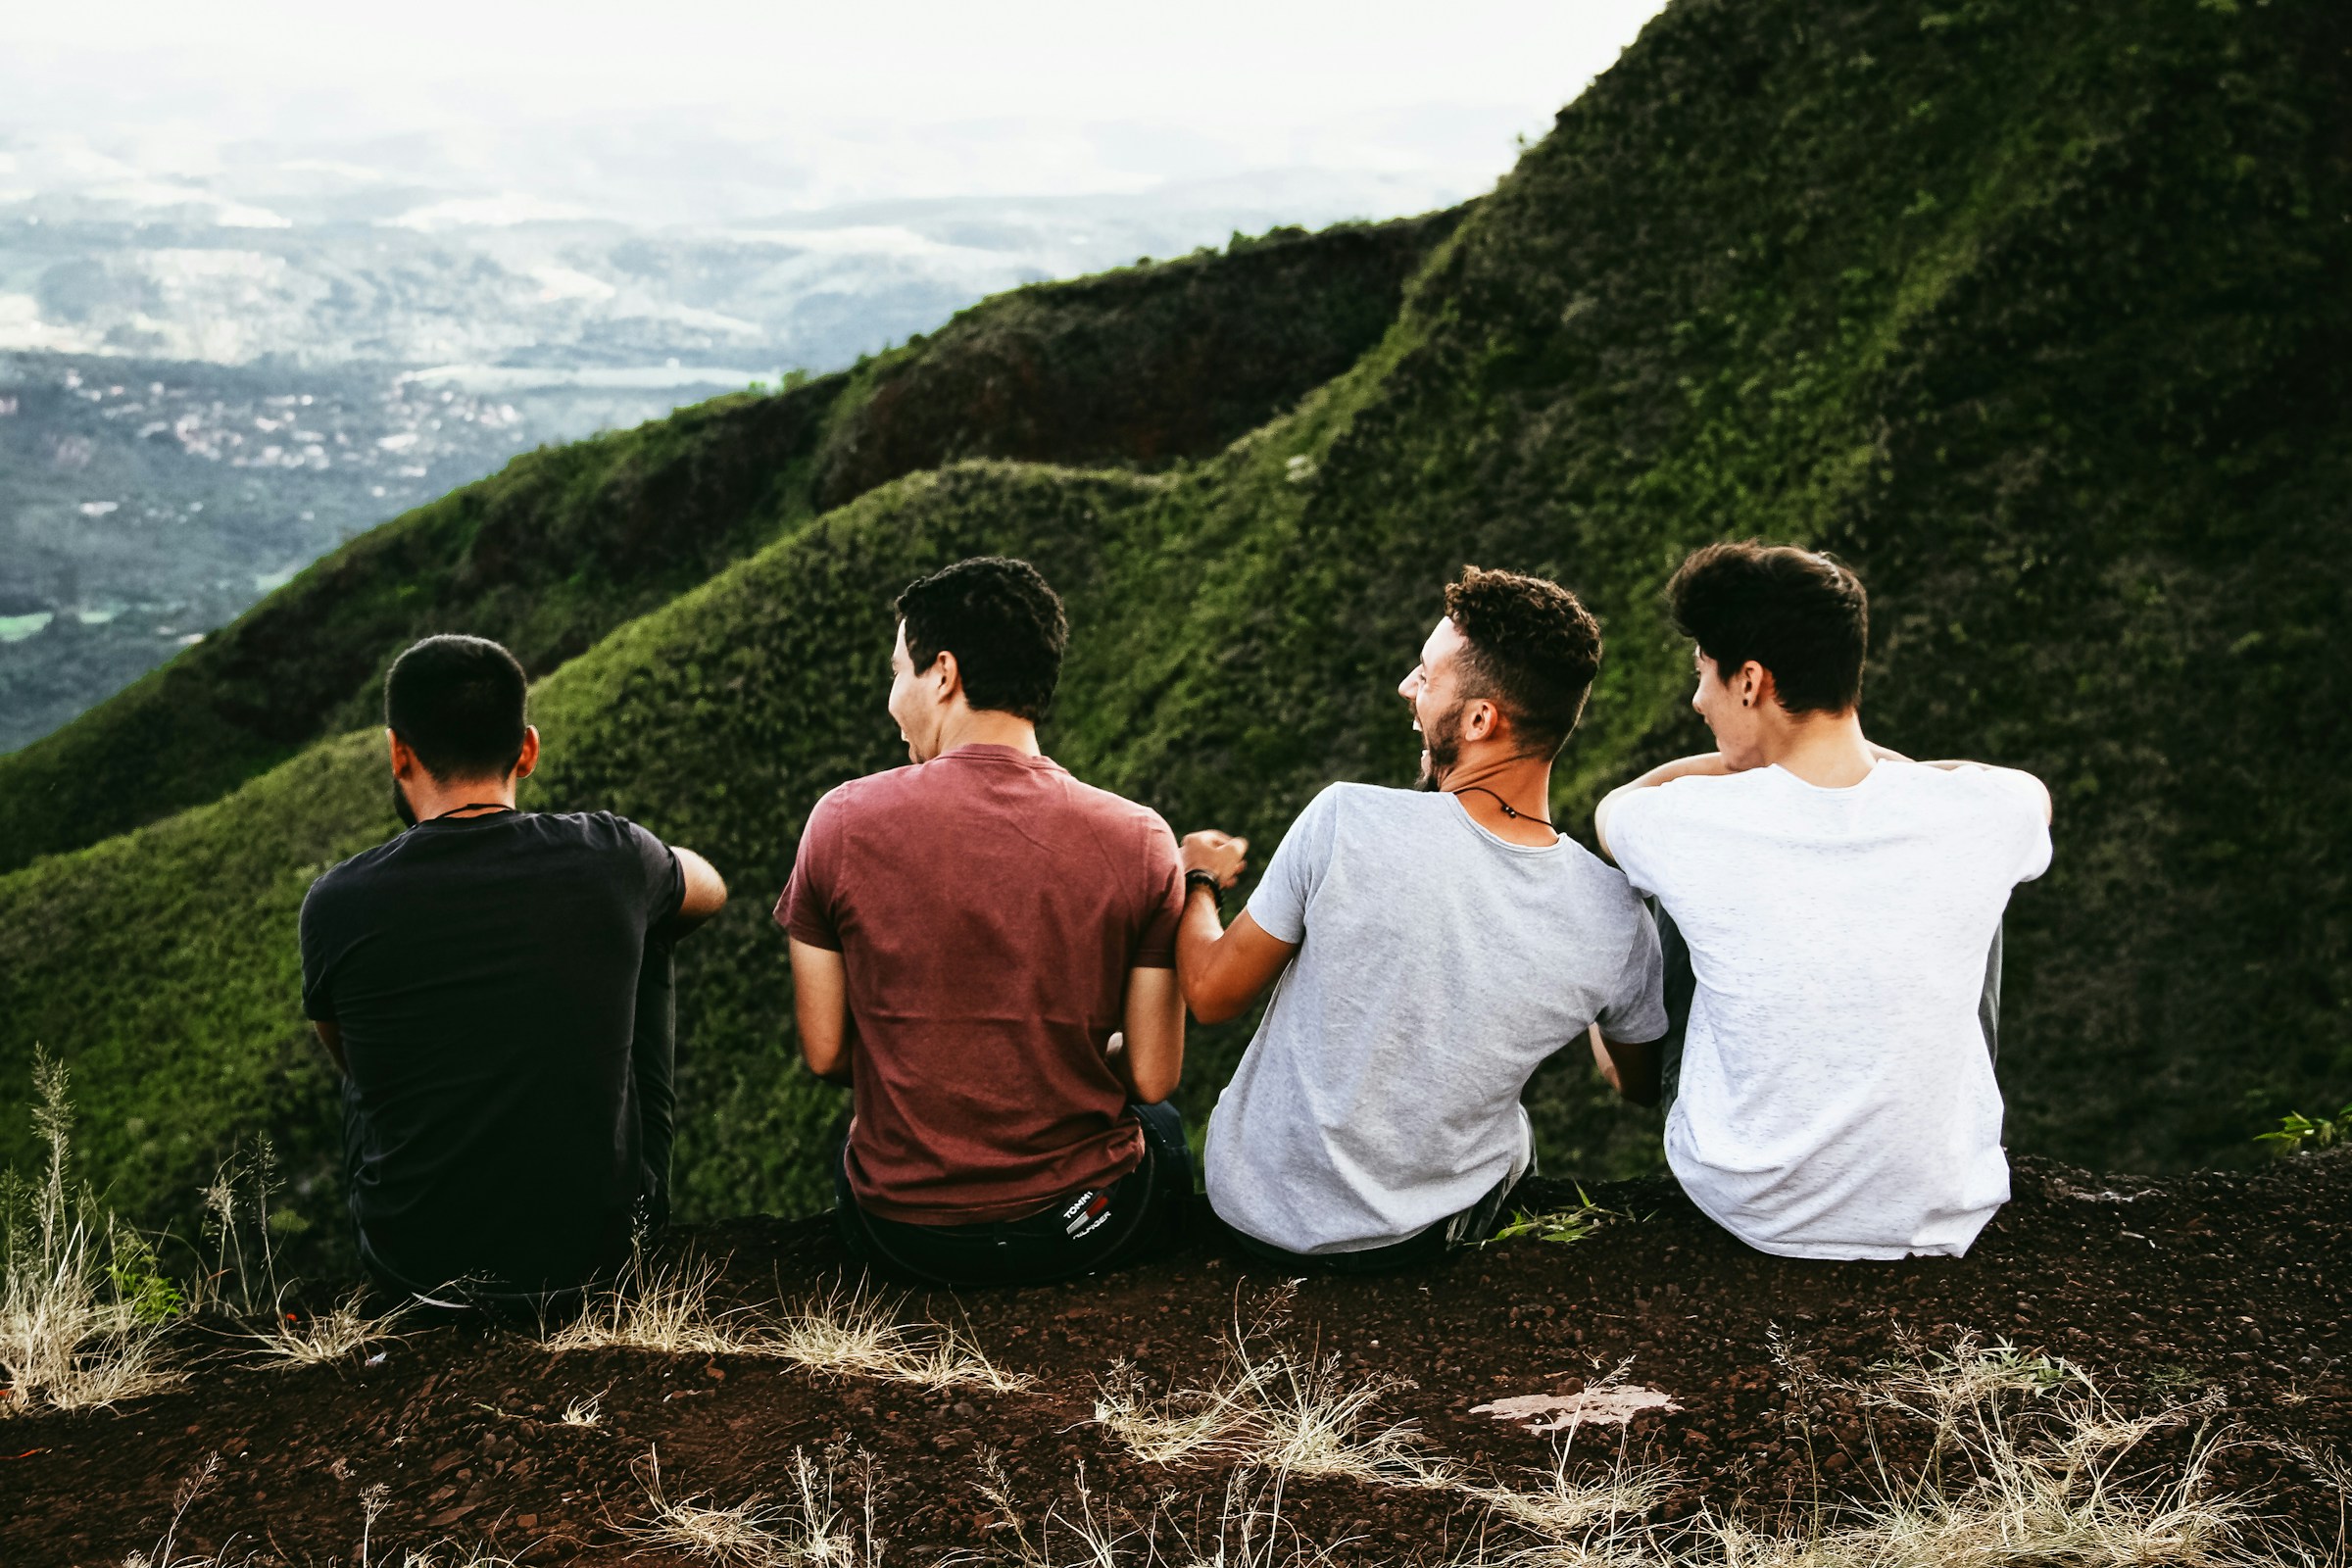 Four young men sitting on a mountain trail | Source: Unsplash